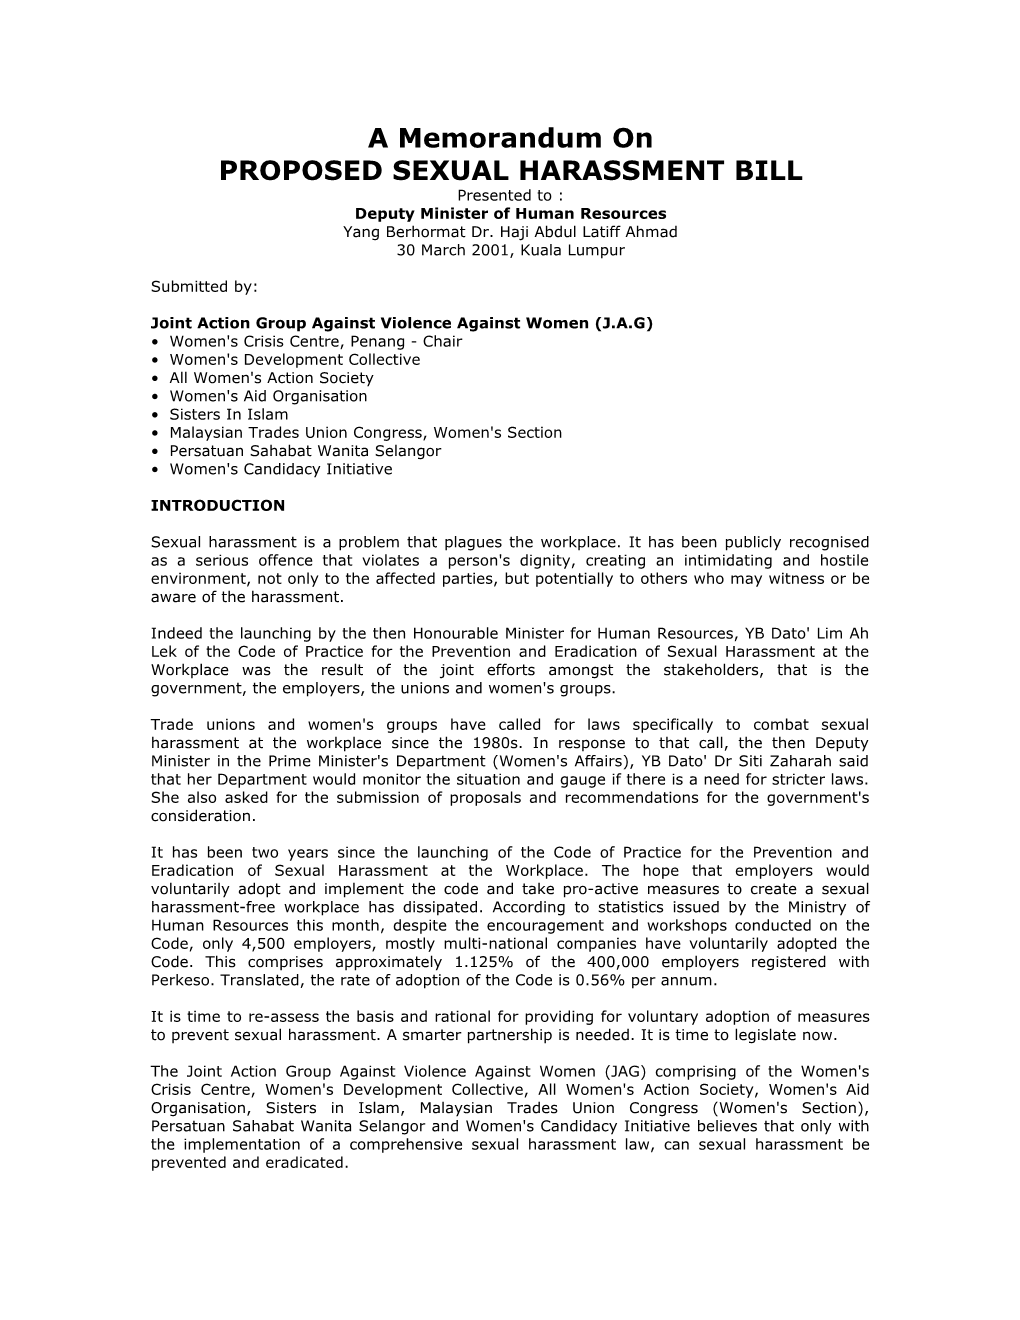 Proposed Sexual Harassment Bill